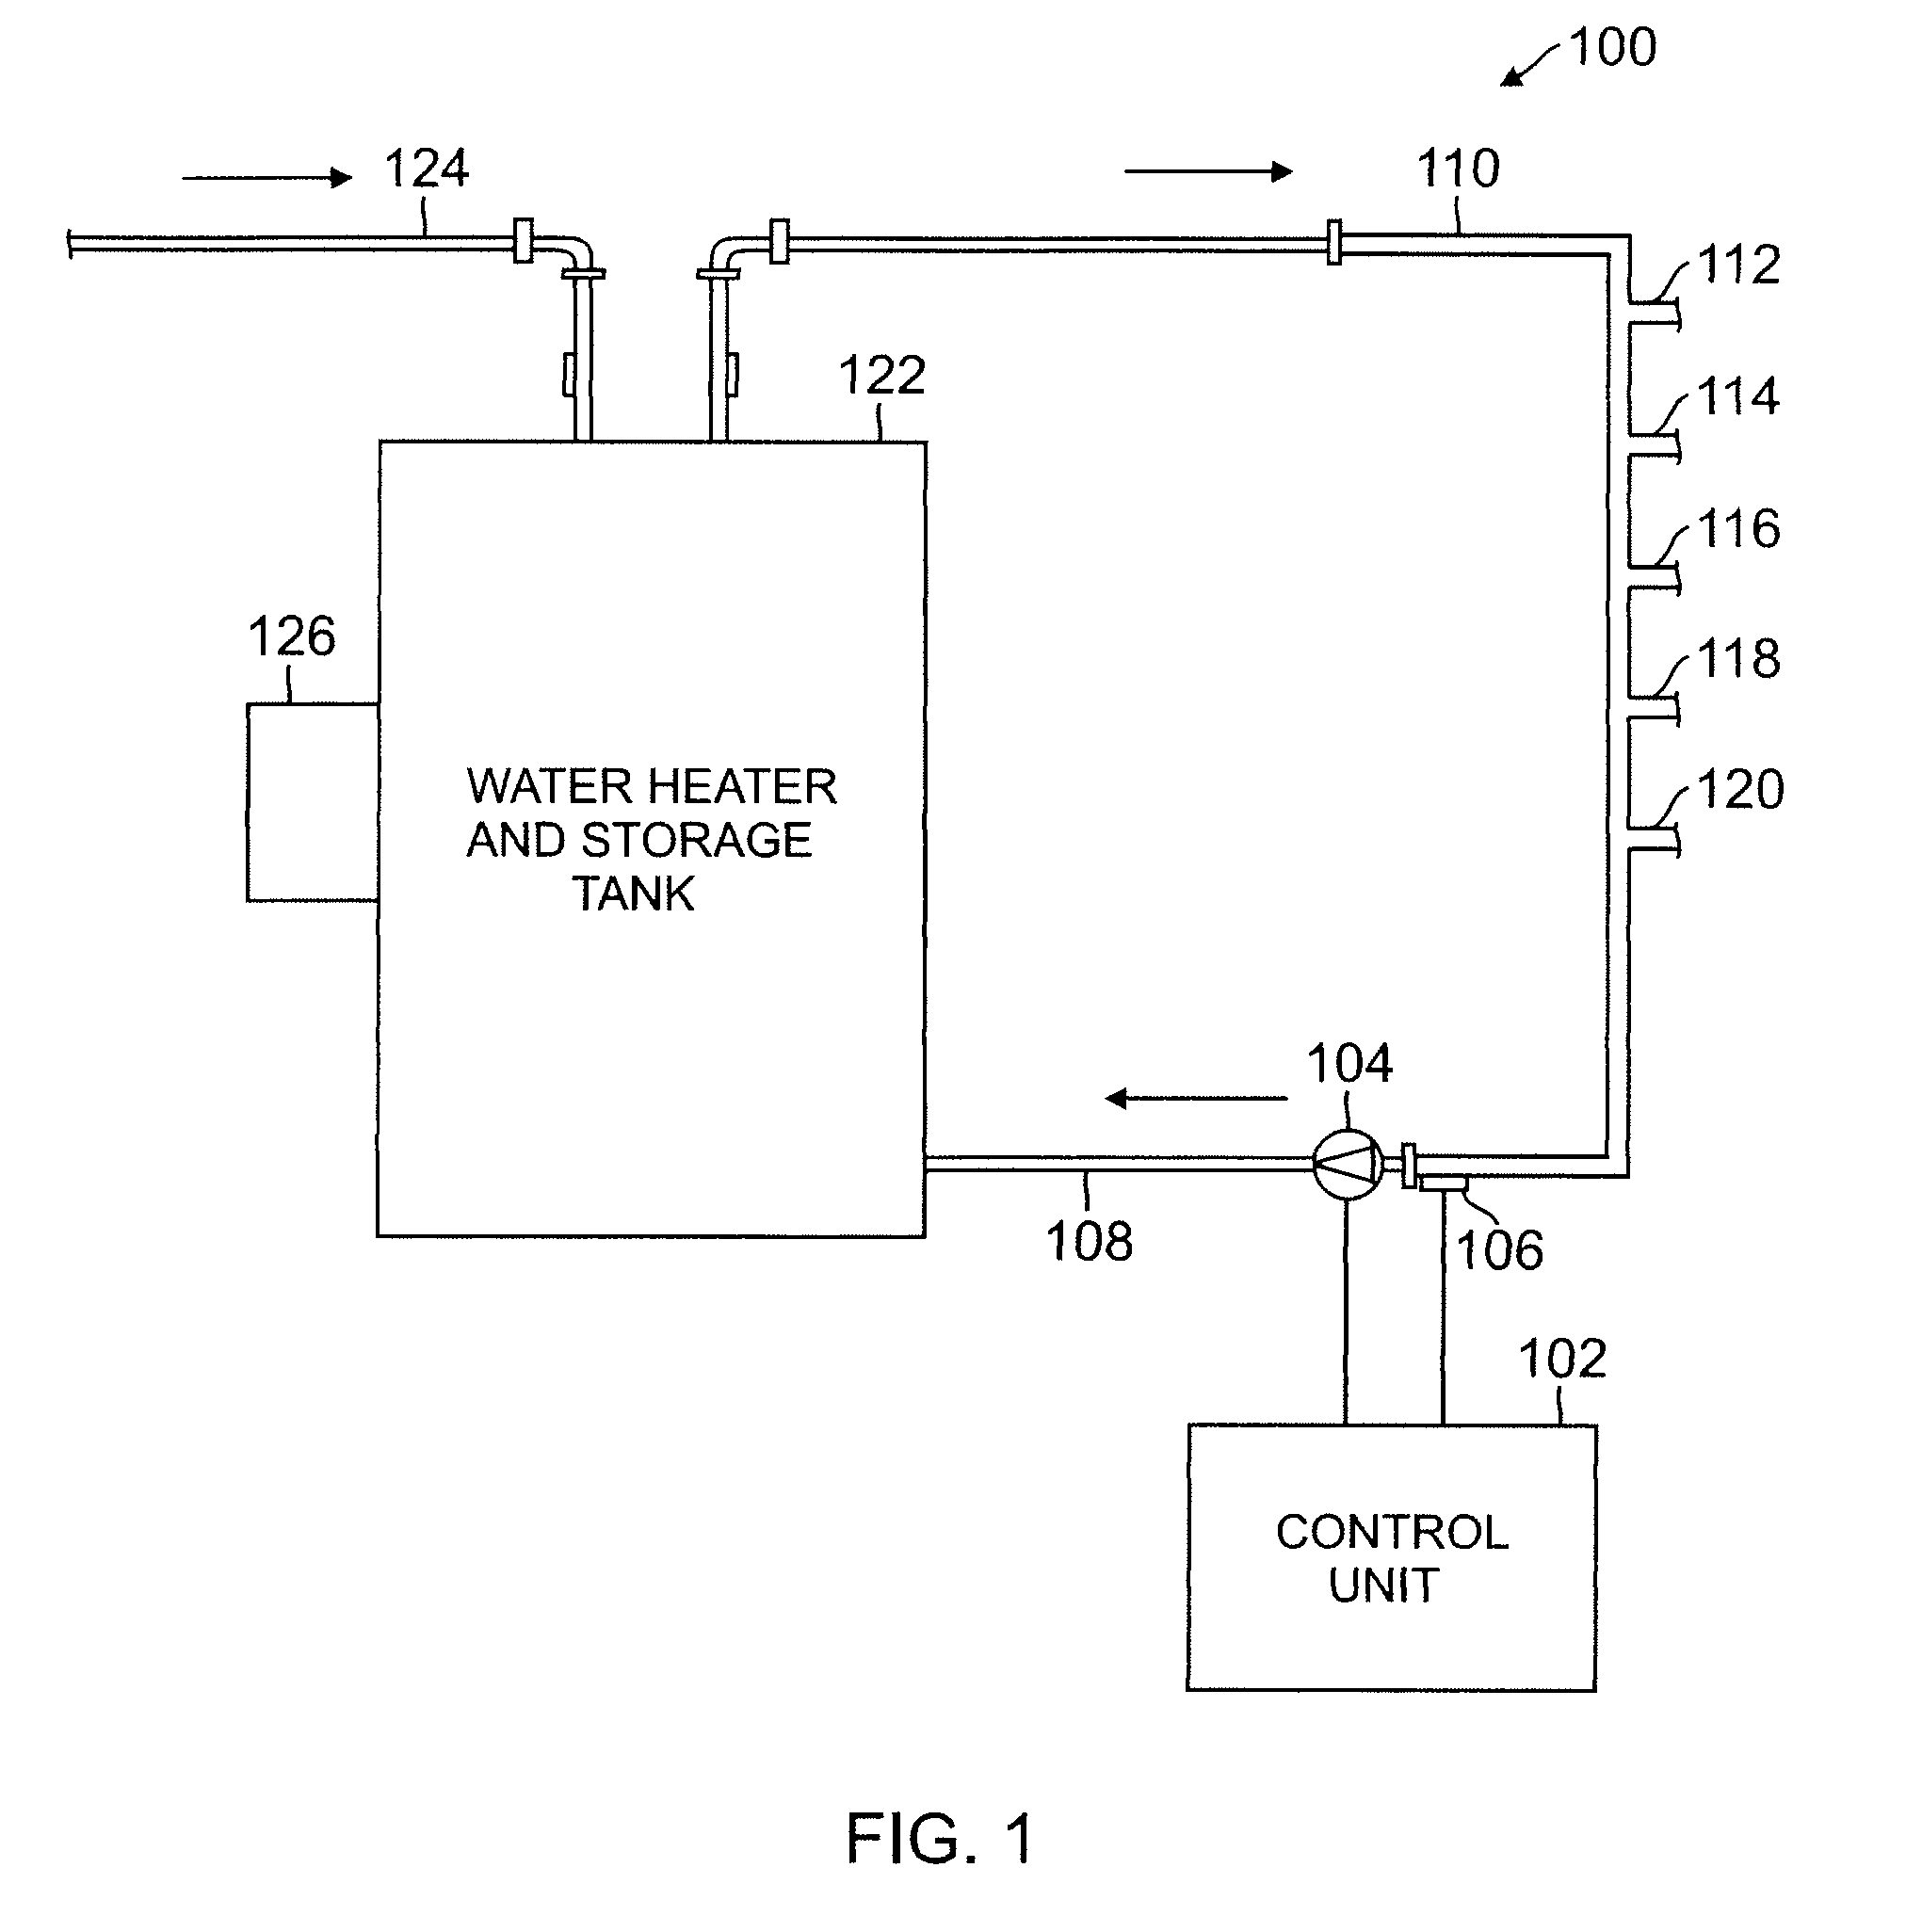 System and method for controlling a pump in a recirculating hot water system